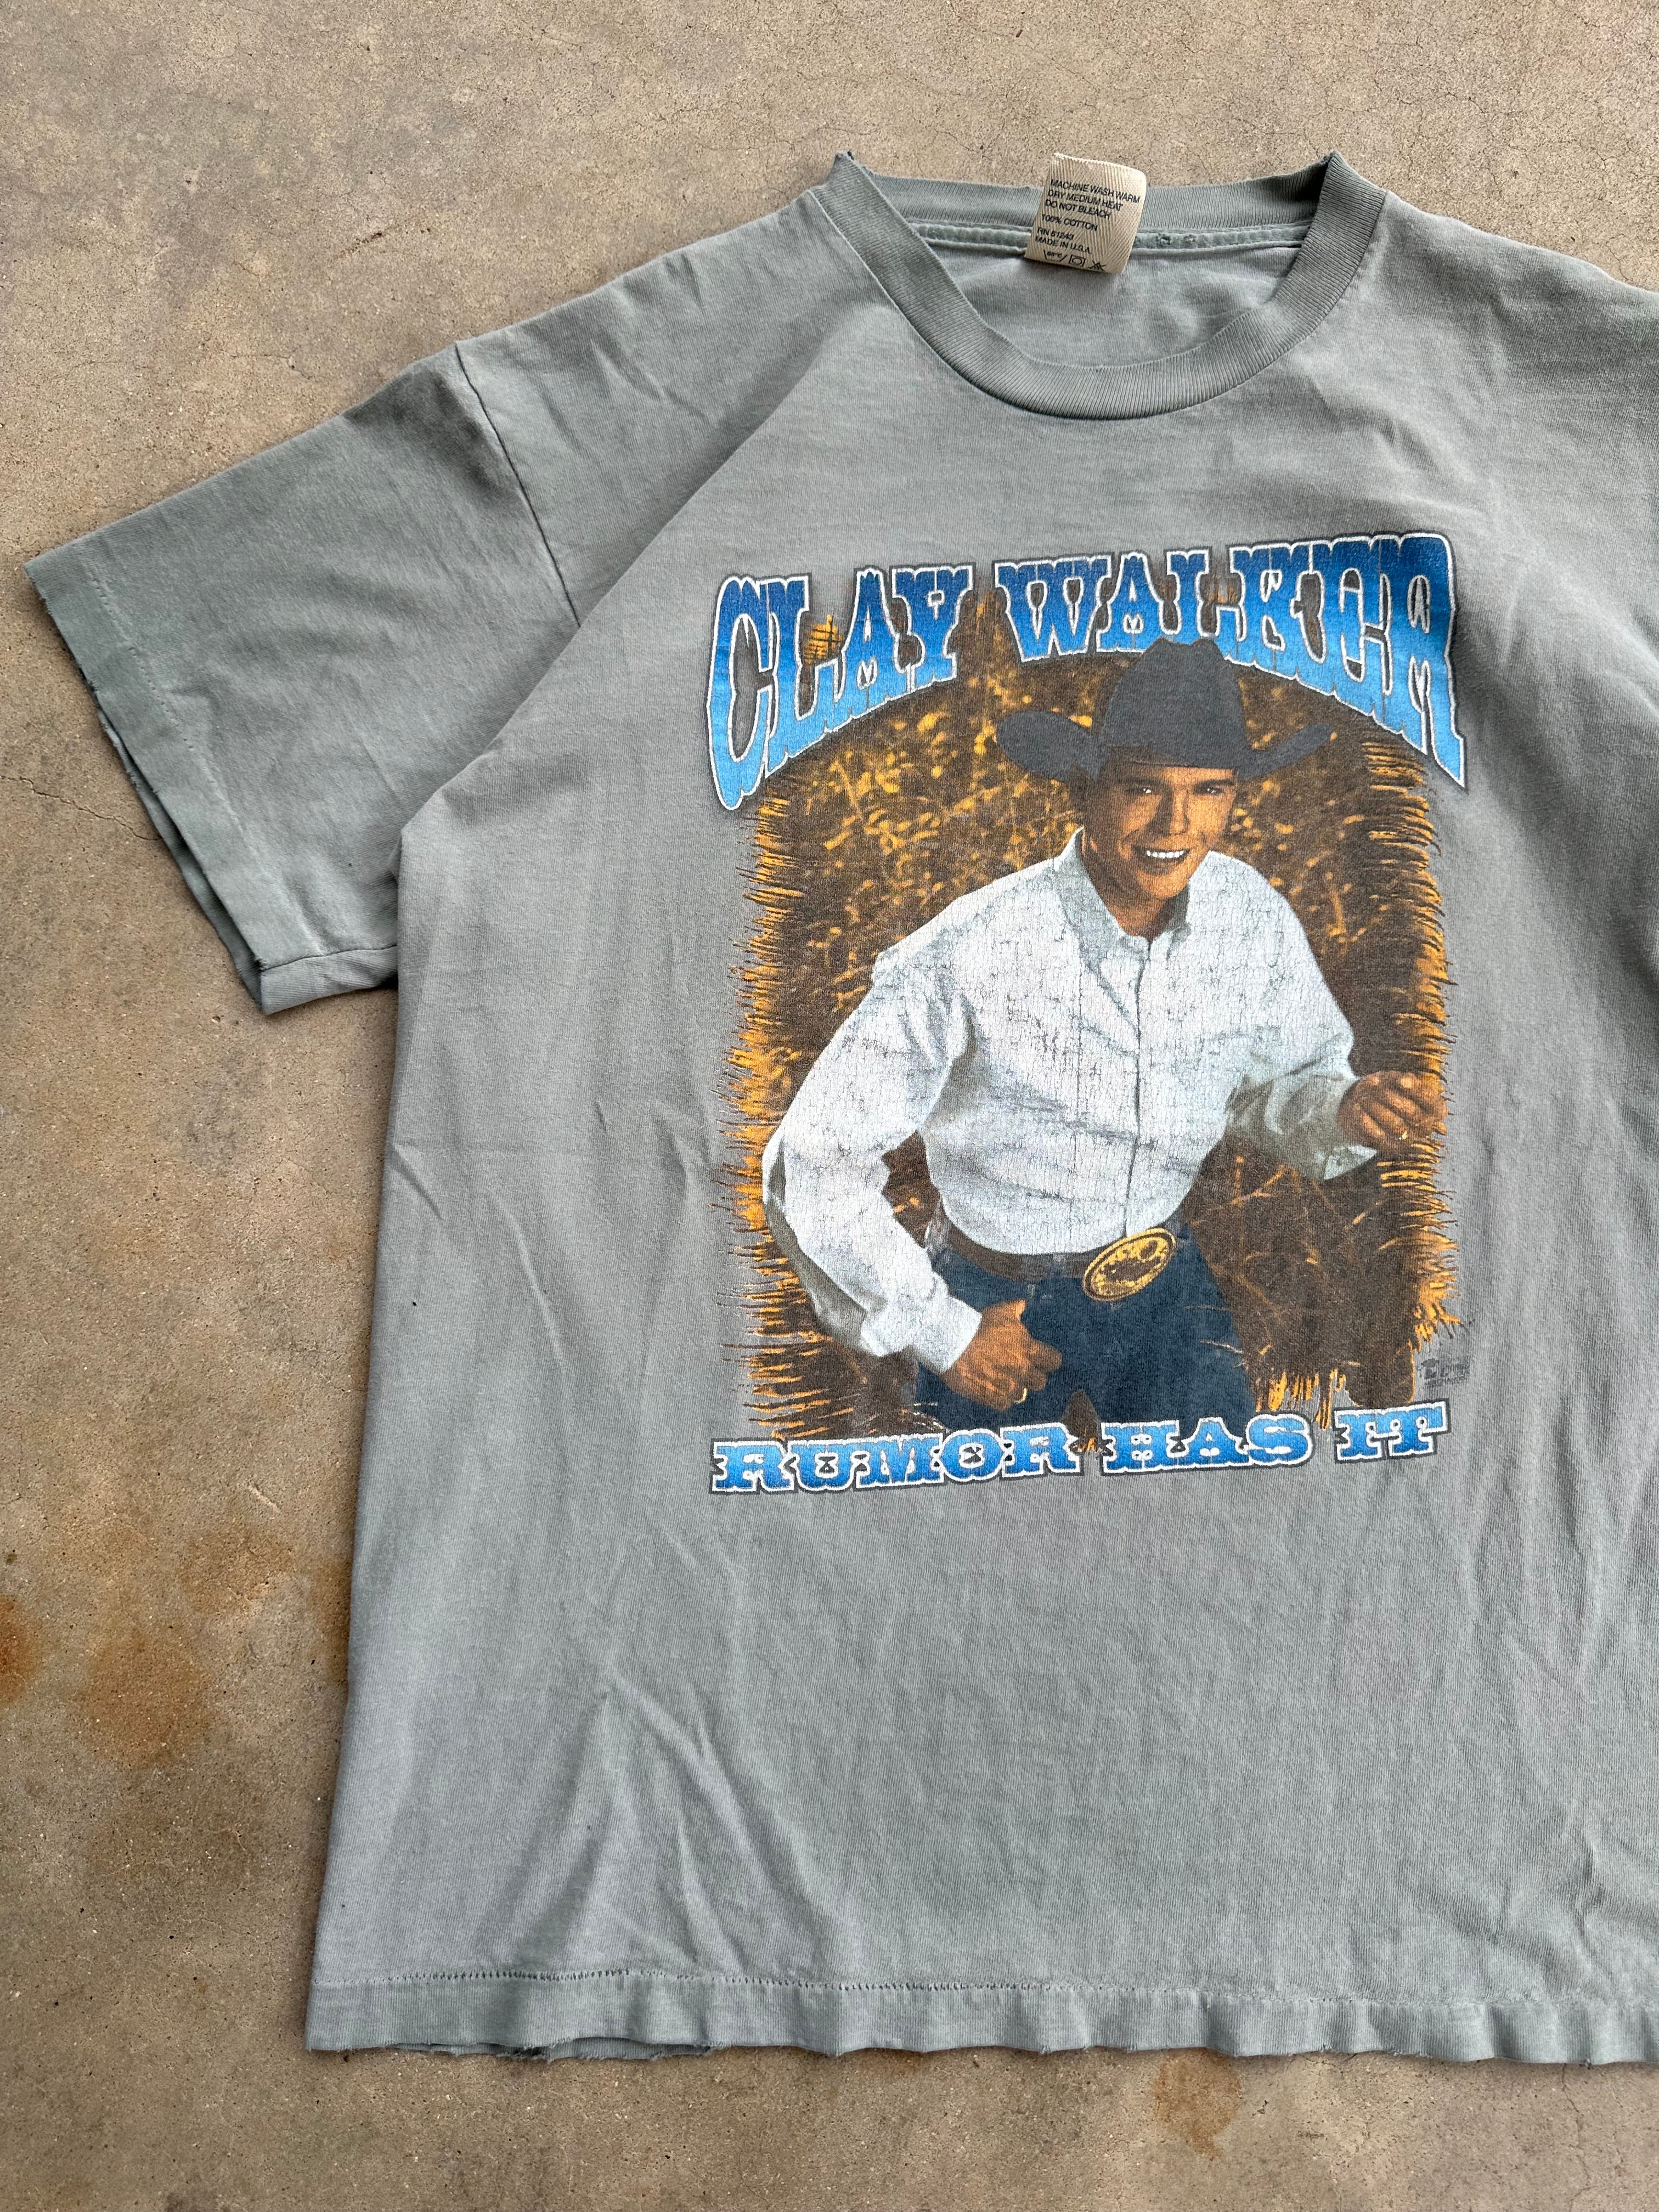 1990s Distressed Clay Walker Tour T-Shirt (M)